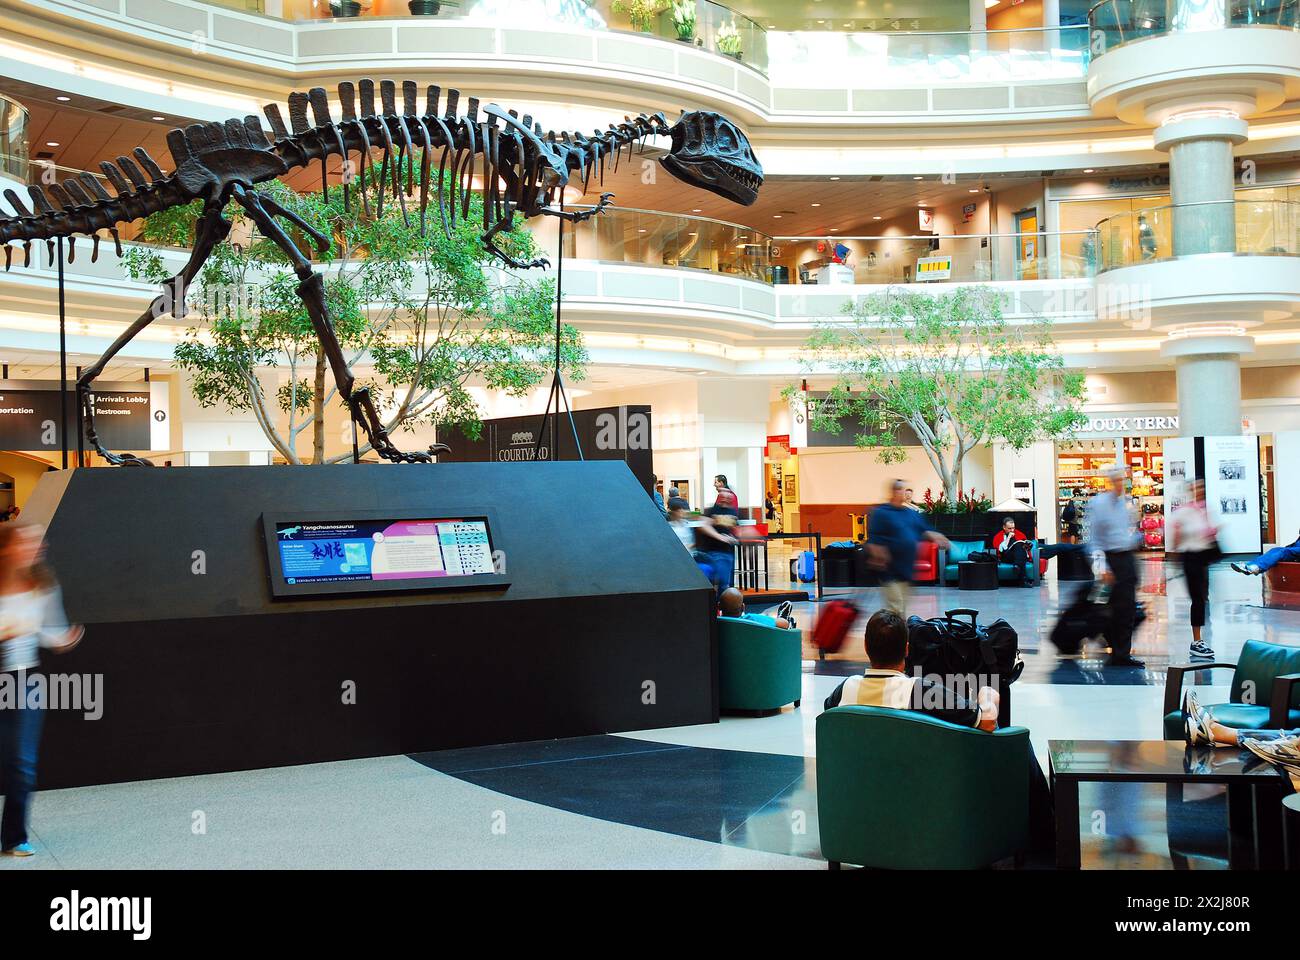 A dinosaur skeleton fossil stands in the atrium of the Atlanta International Airport Stock Photo